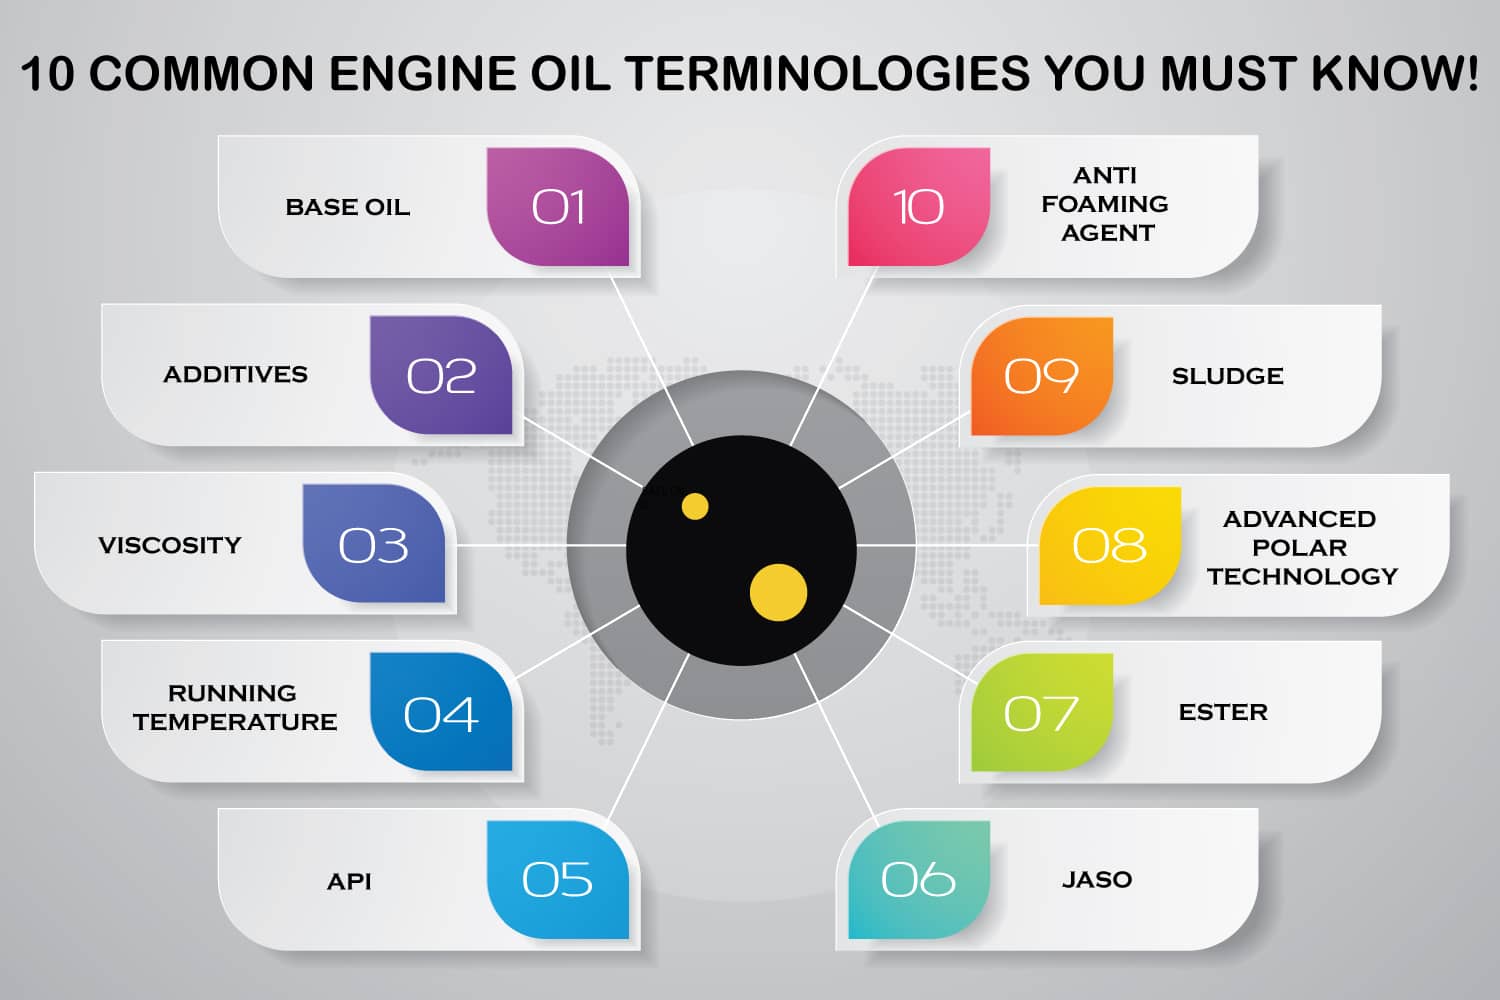 10-COMMON-ENGINE-OIL-TERMINOLOGIES-YOU-MUST-KNOW!